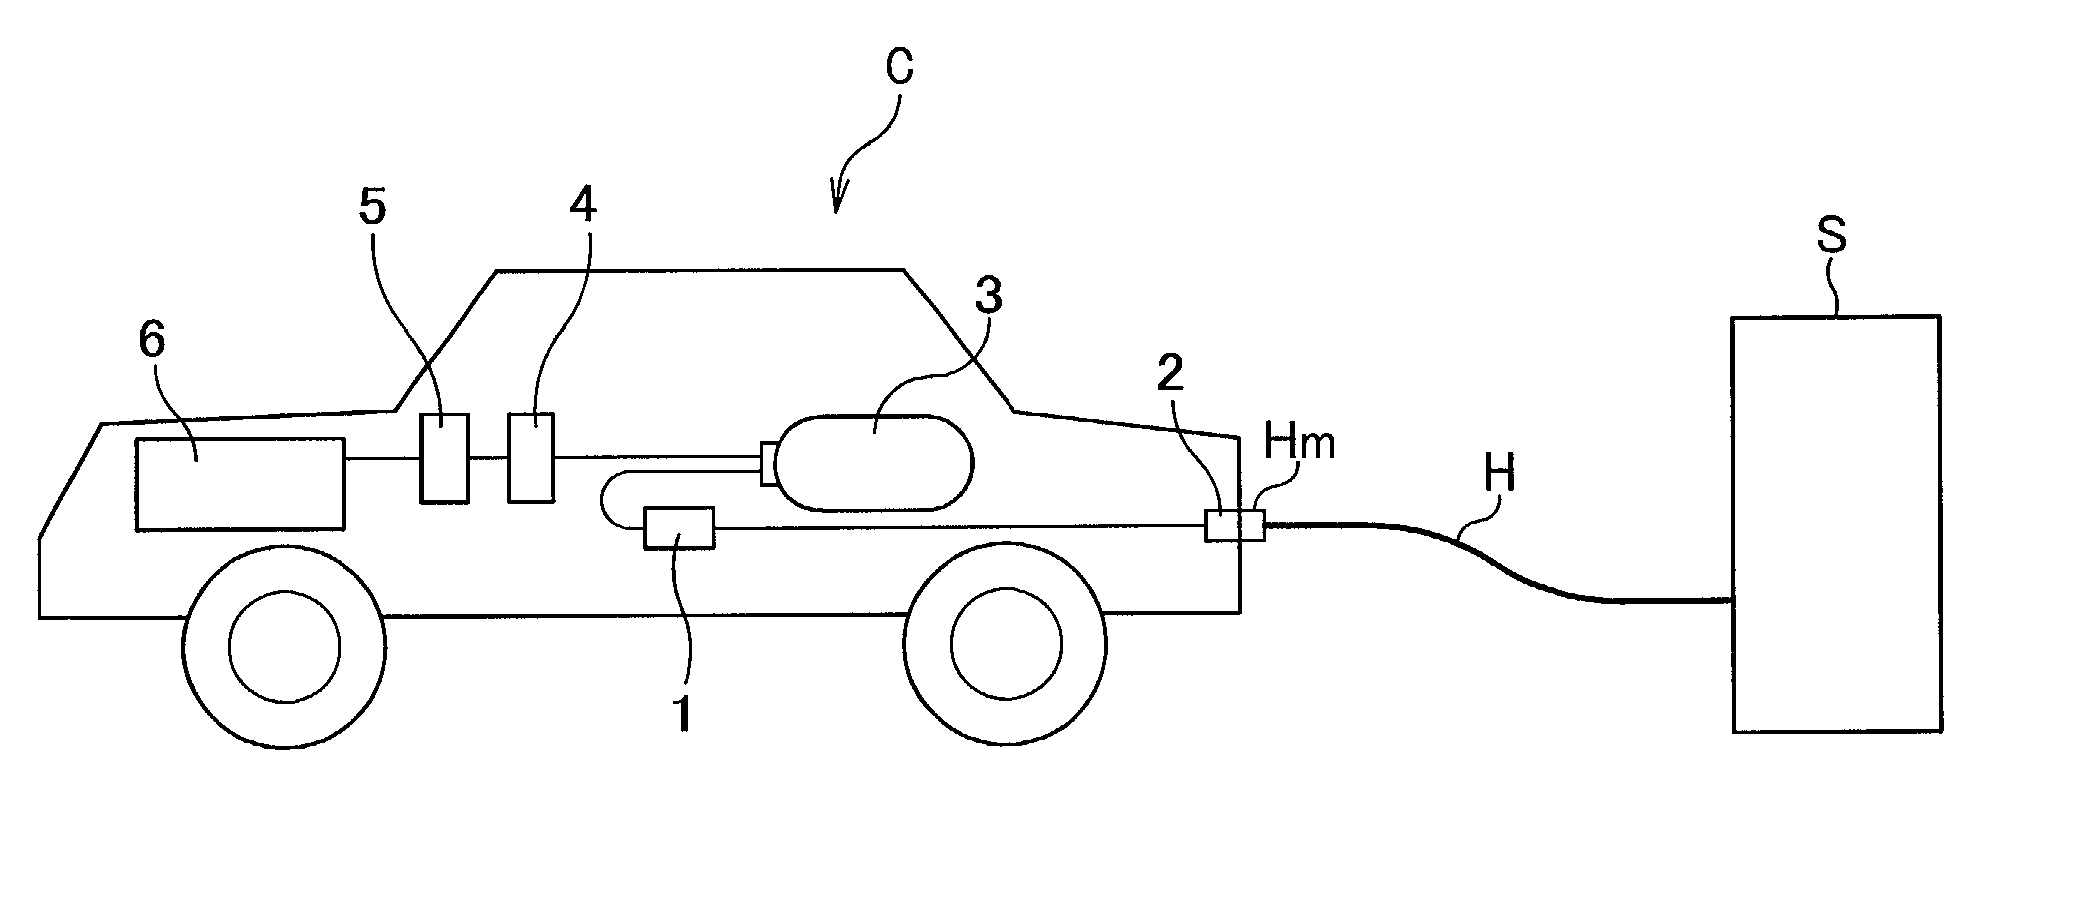 Apparatus and process for rapidly filling with hydrogen